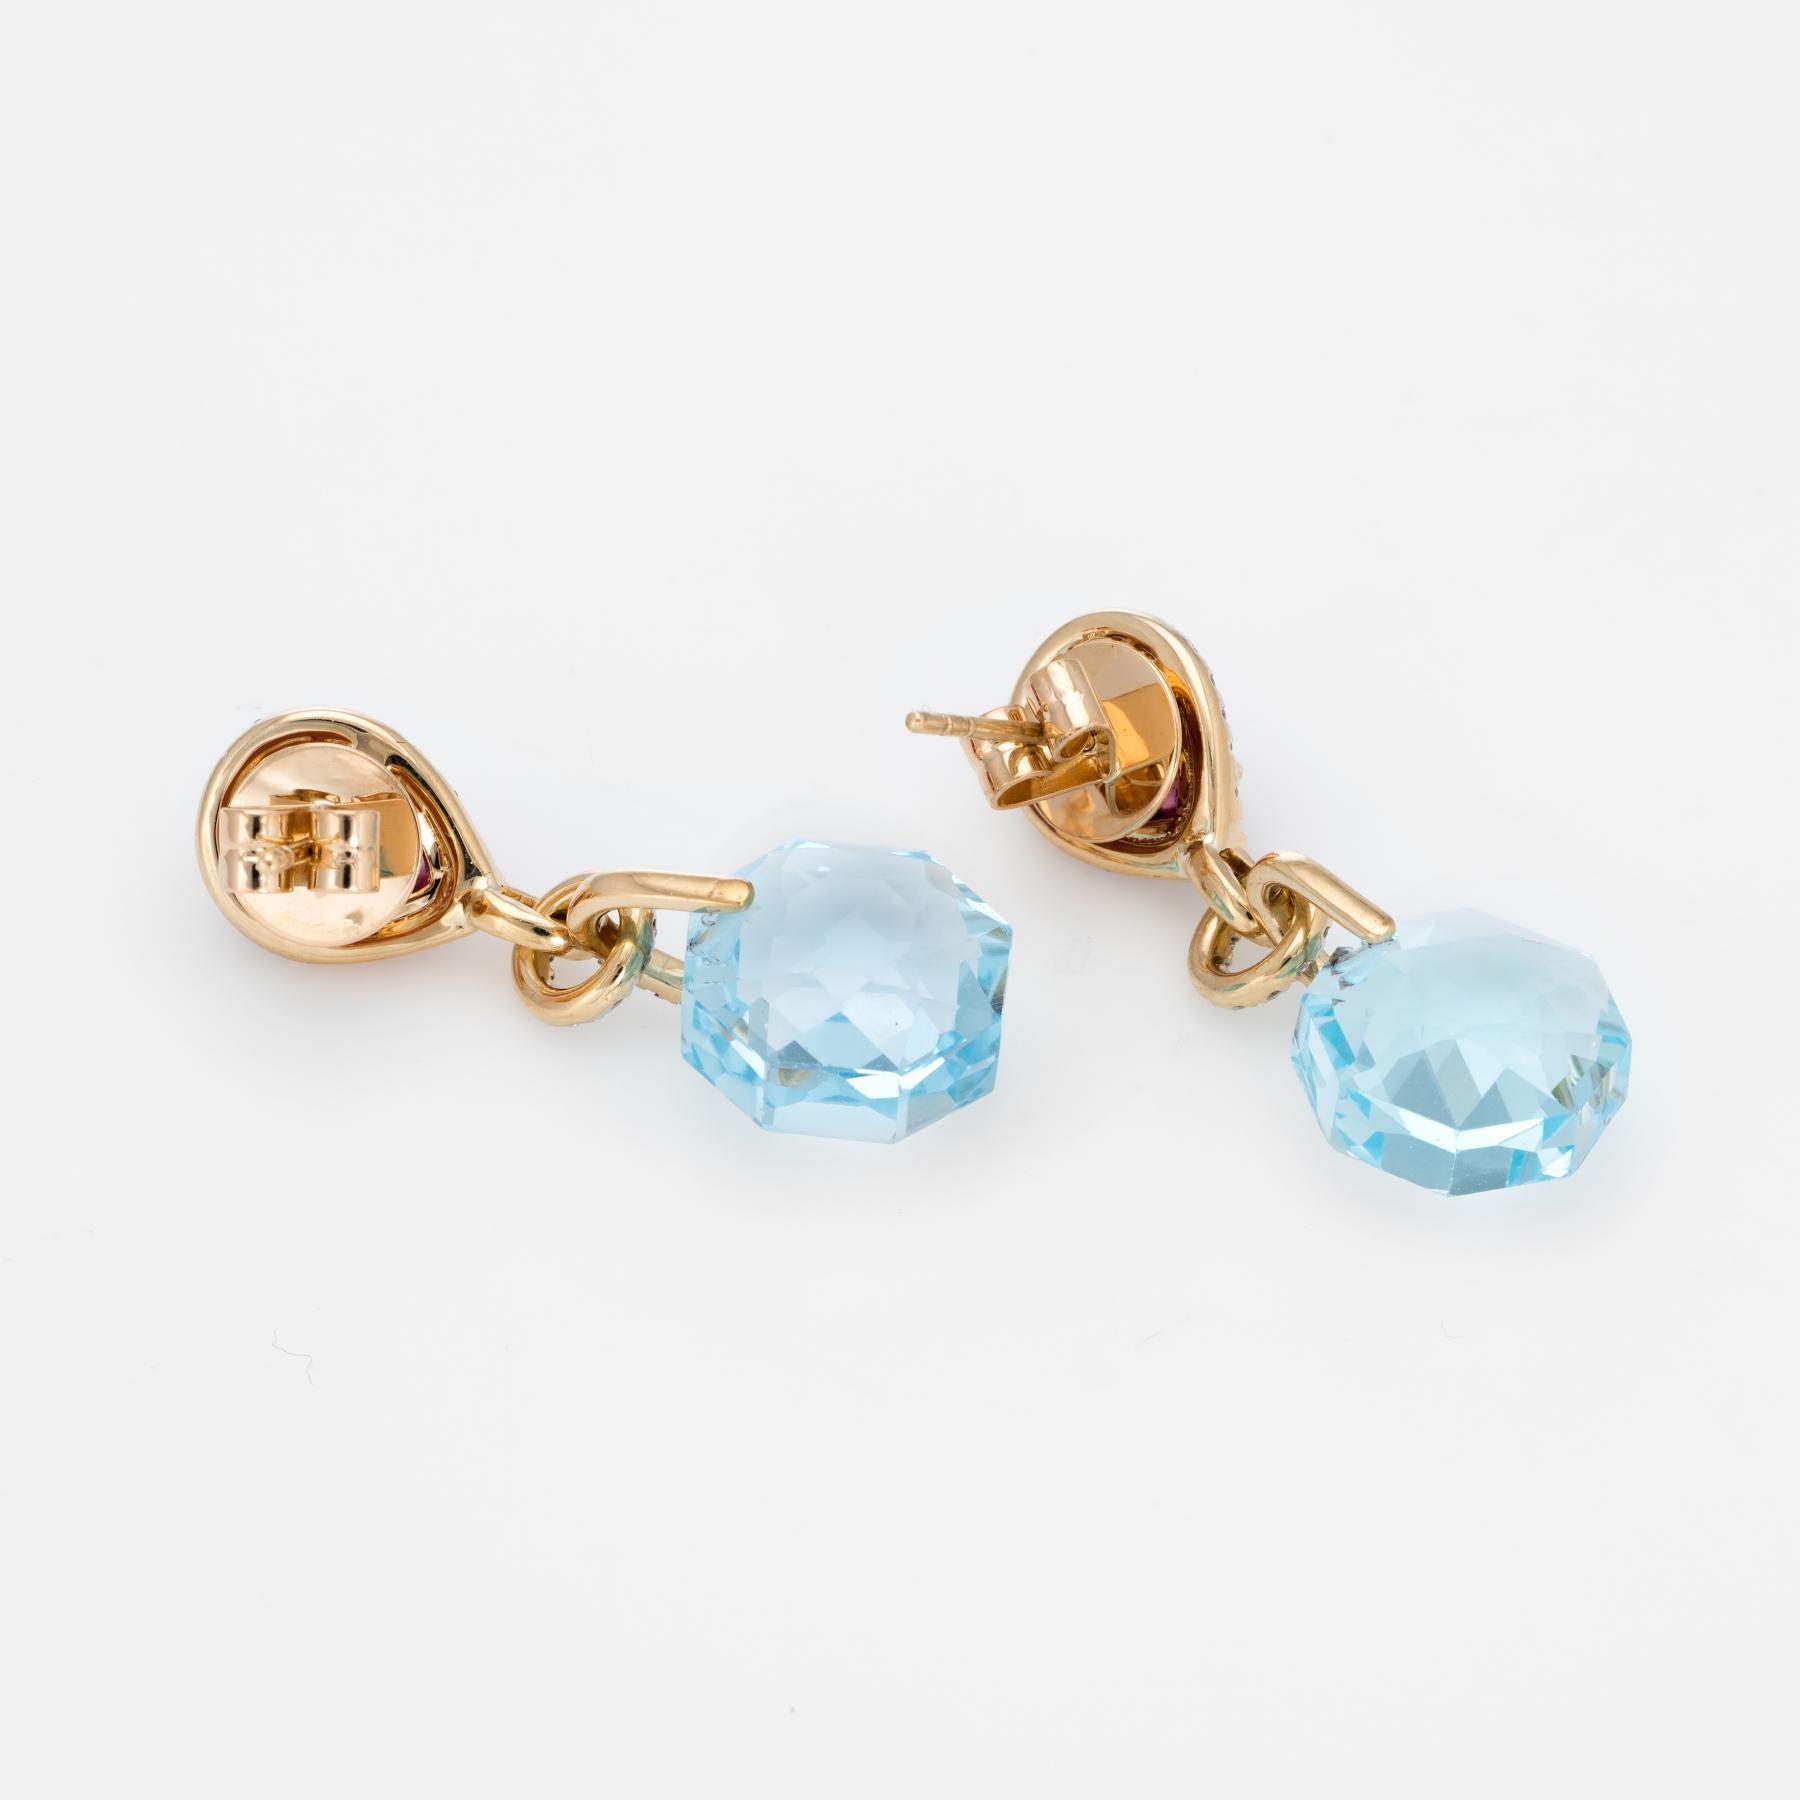 Elegant pair of estate diamond drop earrings, crafted in 18k yellow gold. 

Faceted hexagonal cut blue topaz measures 13mm (estimated at 12 carats each - 24 carats total estimated weight), accented with pear cut cabochon pink tourmalines measuring